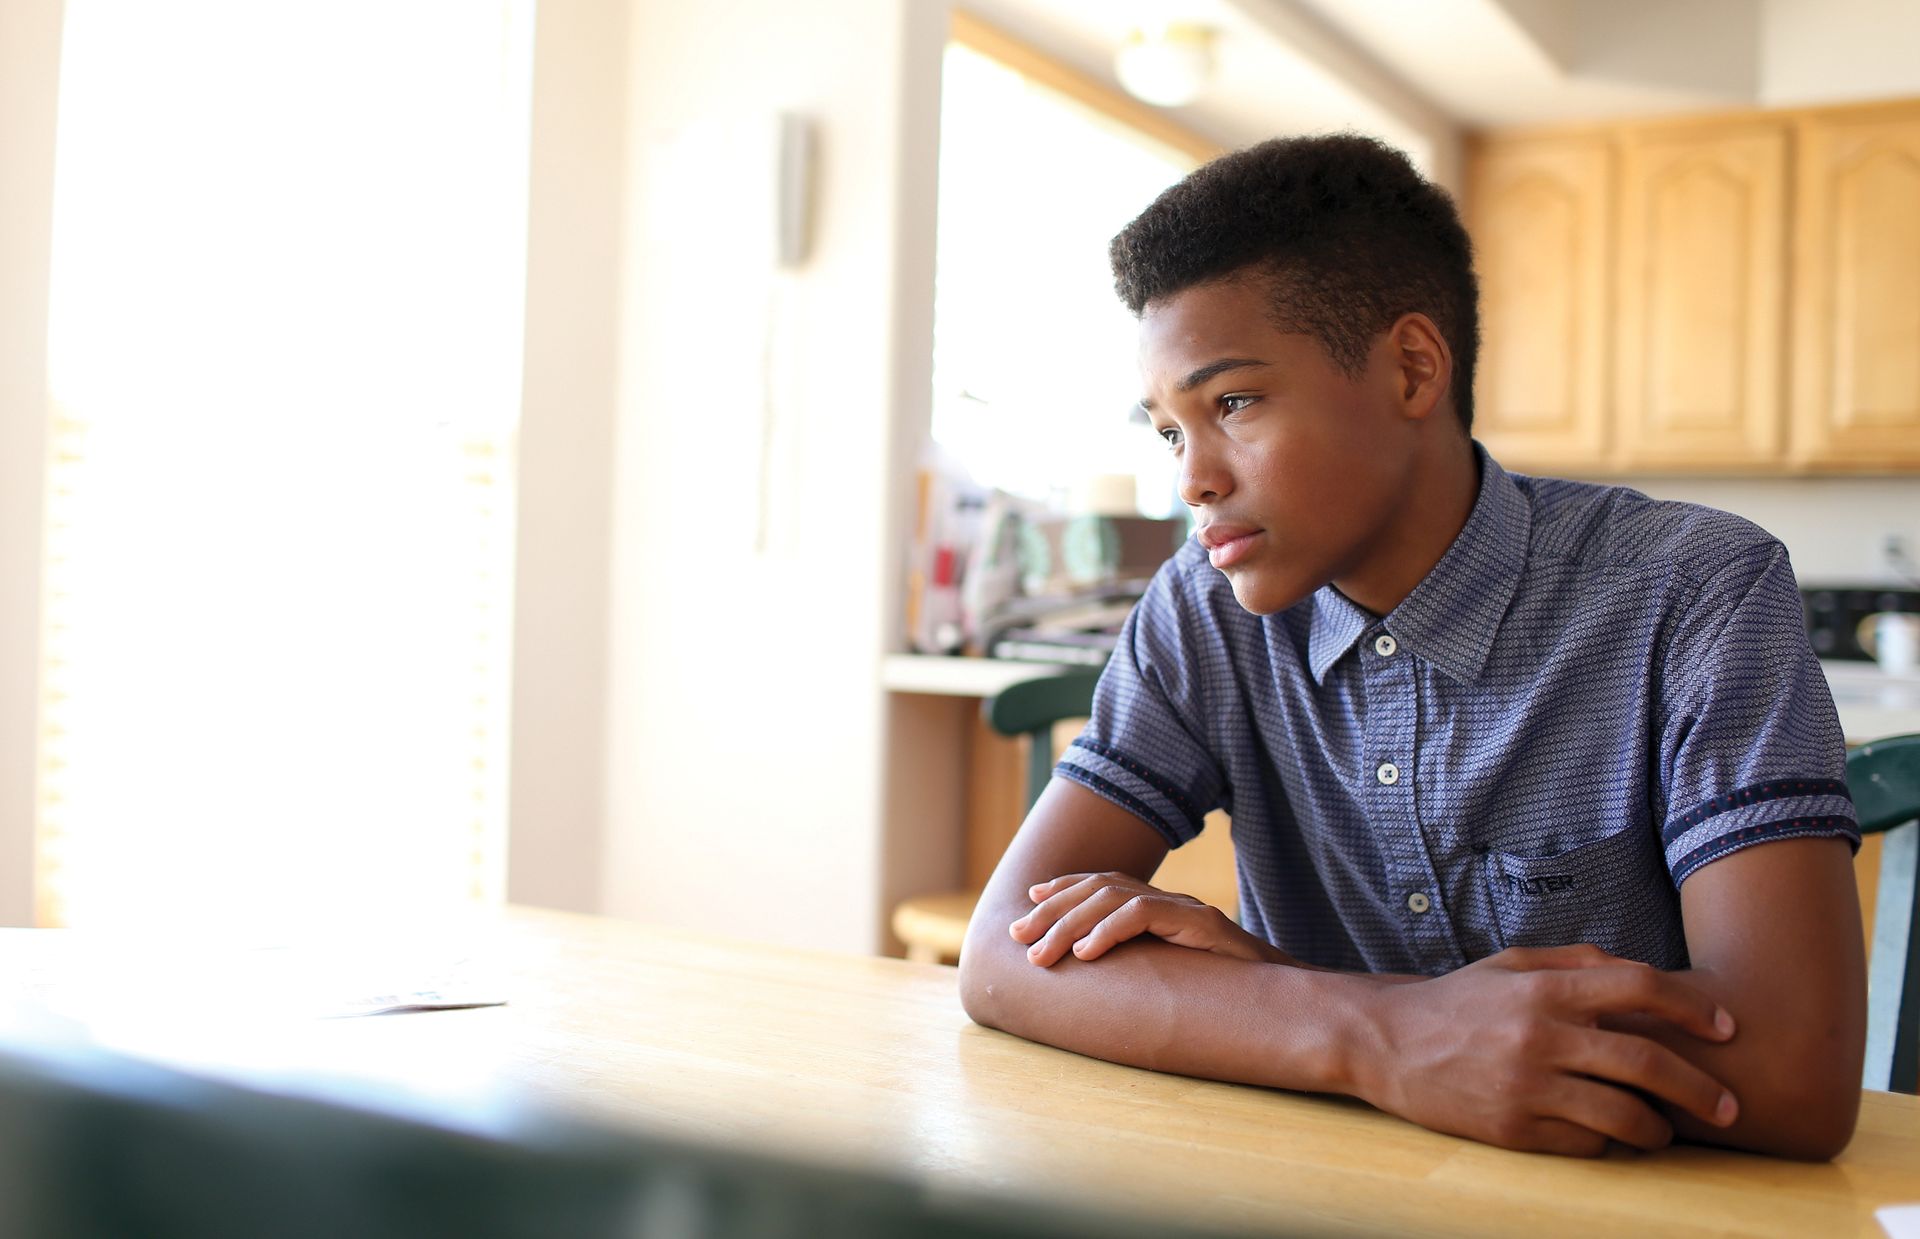 A young man pondering at a kitchen table.